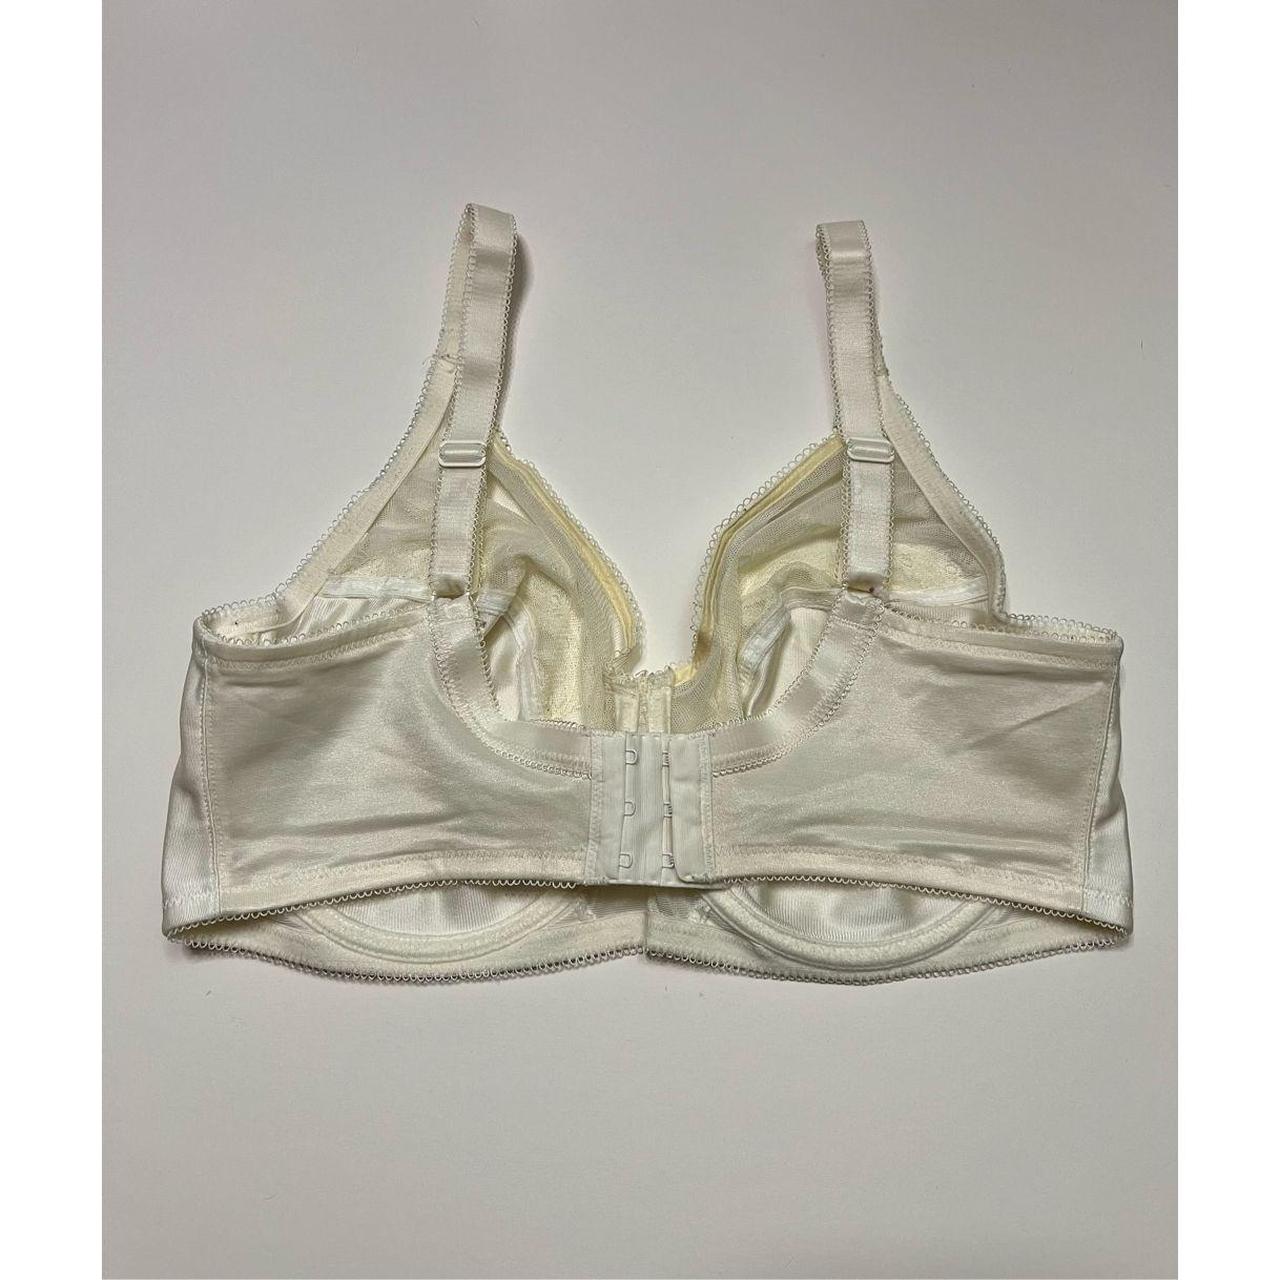 Wacoal Bra 36DD Underwire Lace Unlined Soft Cup